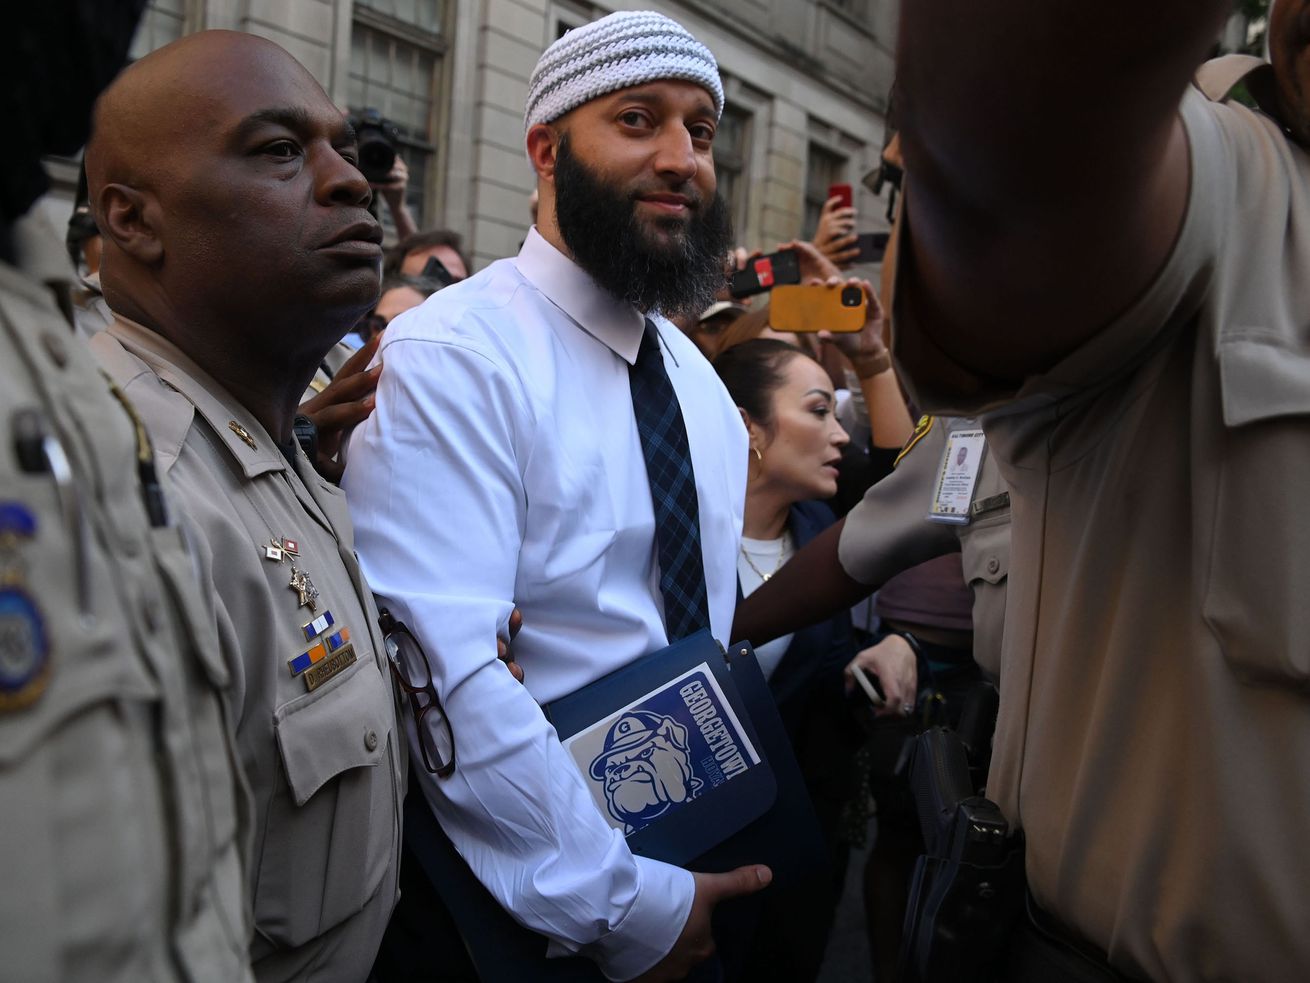 Adnan Syed is free — and it only took years of criminal justice reform